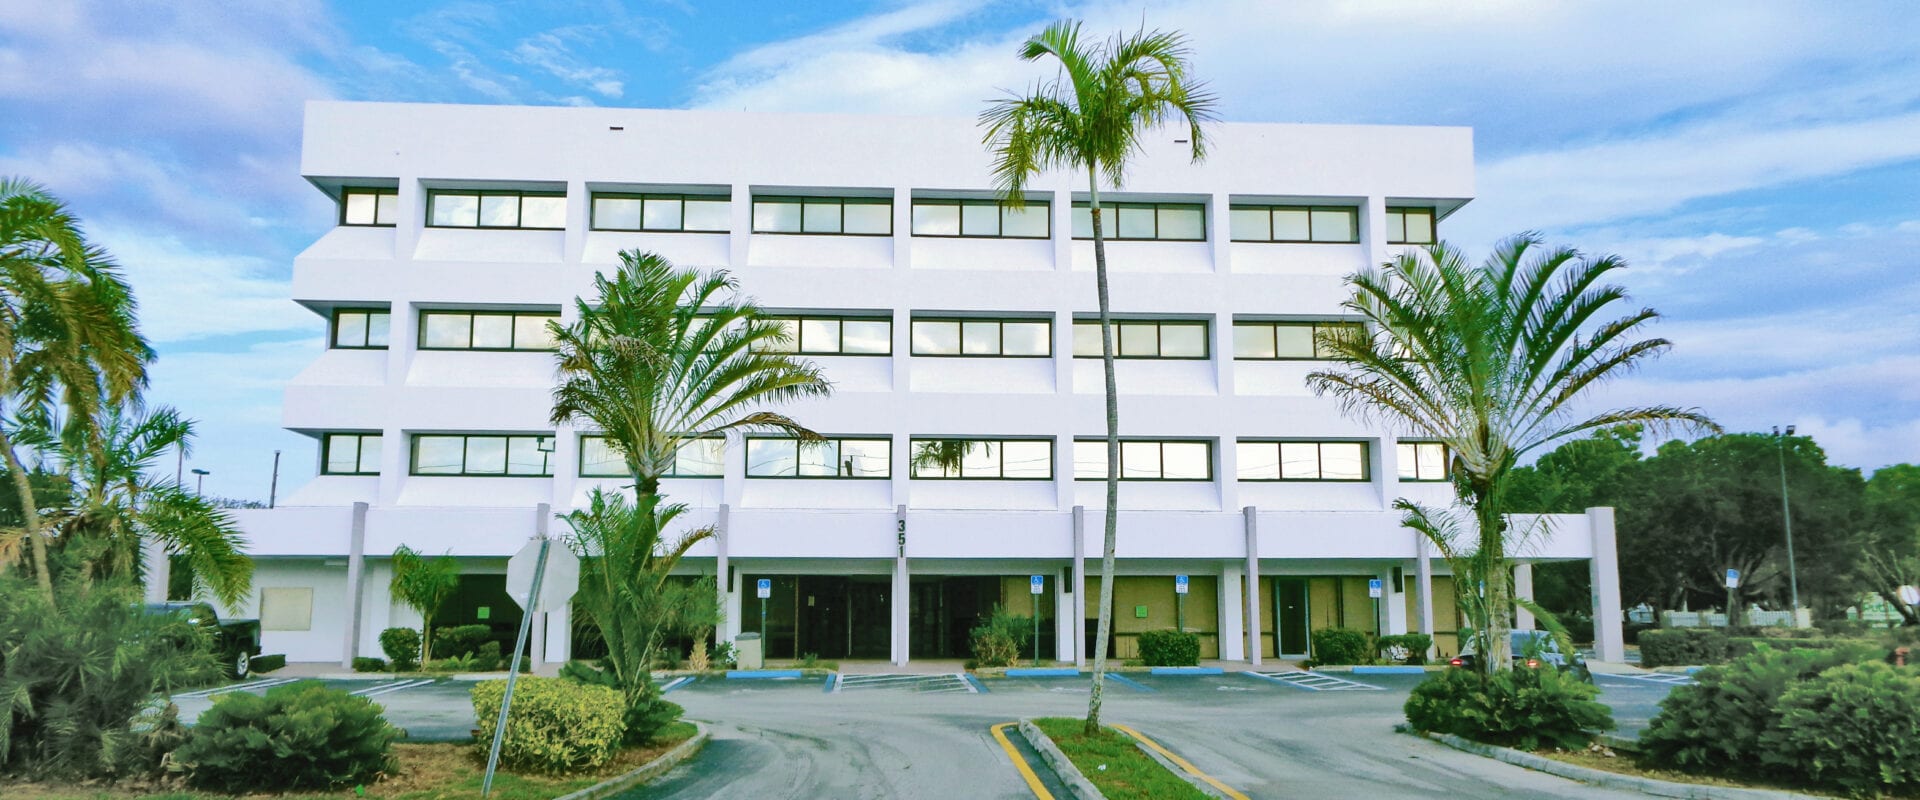 For Lease Office Space Pompano Beach